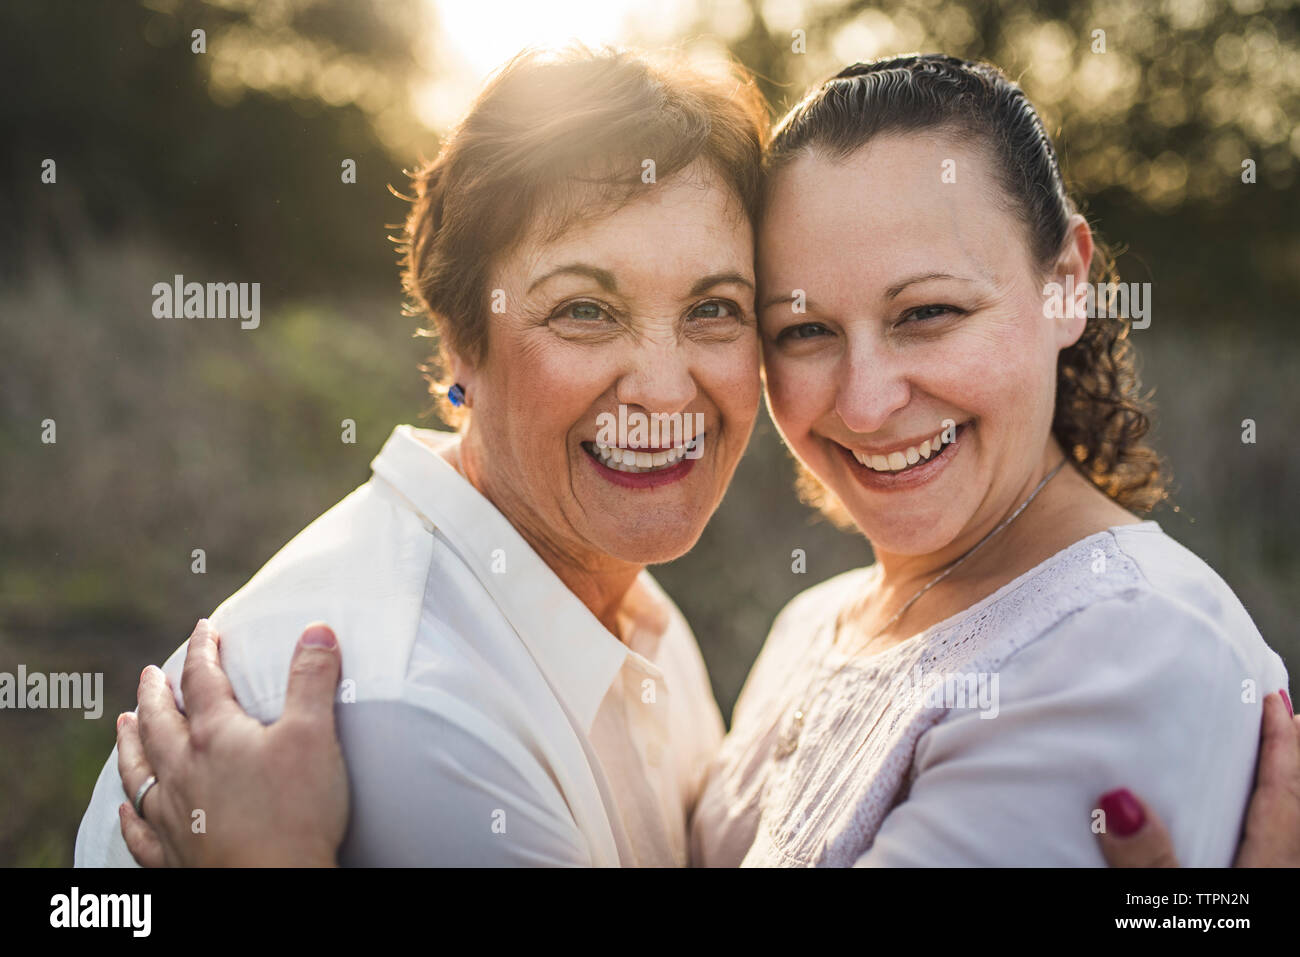 Close up portrait of adult mother and daughter embracing and smiling Banque D'Images